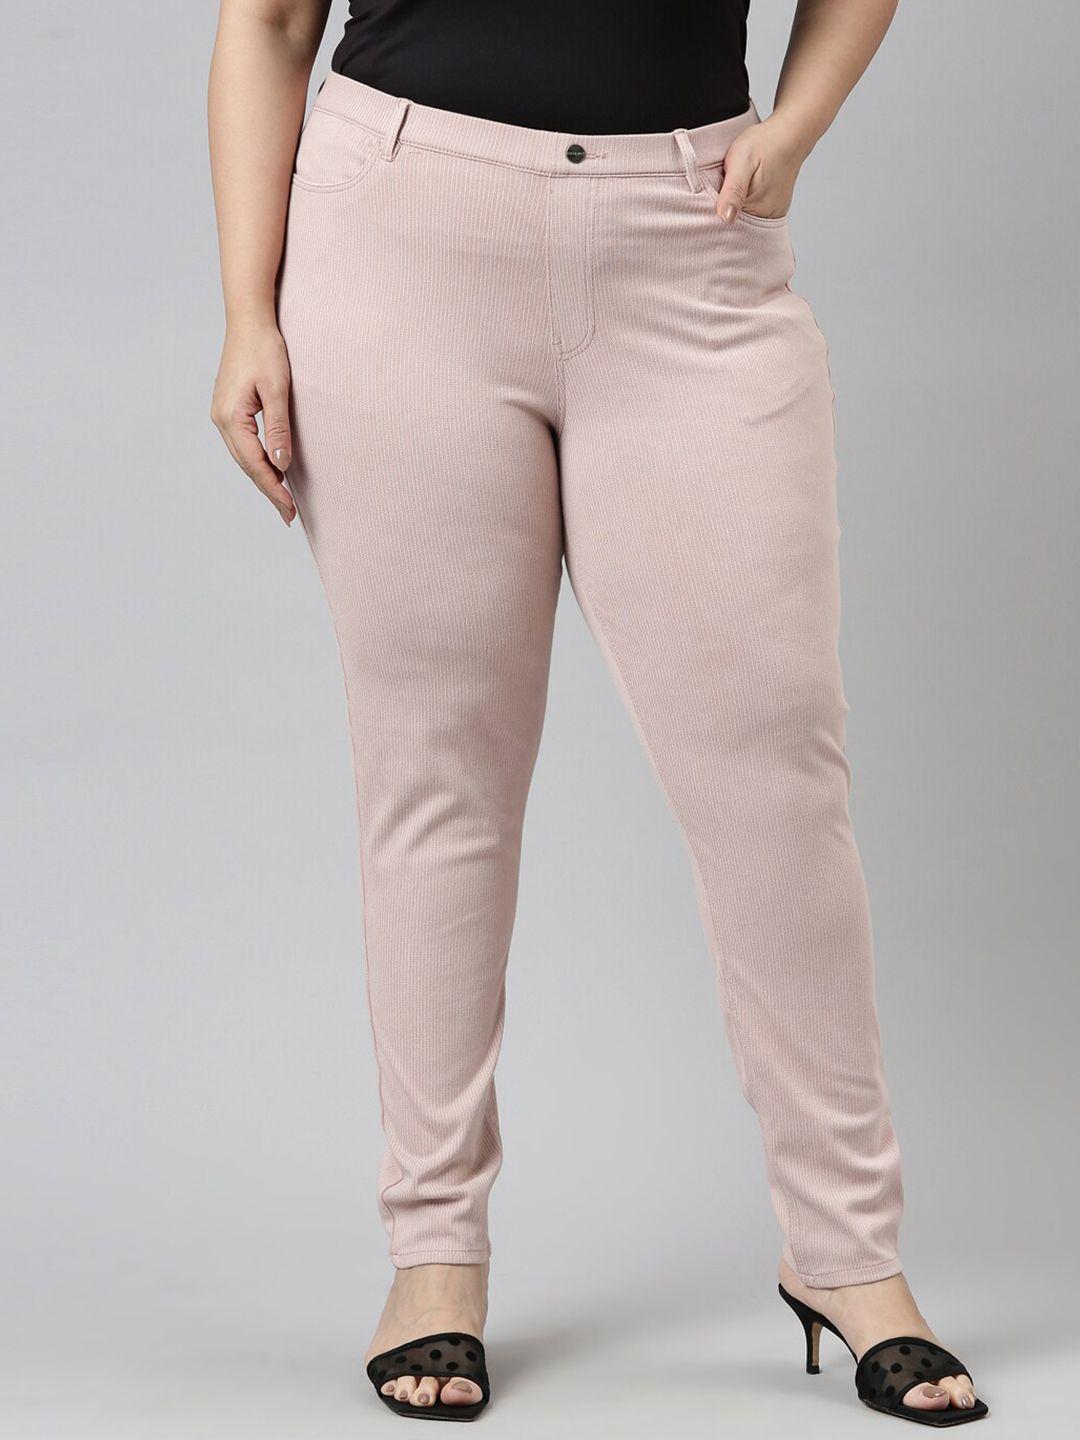 go-colors-women-pink-striped-slim-fit-jeggings